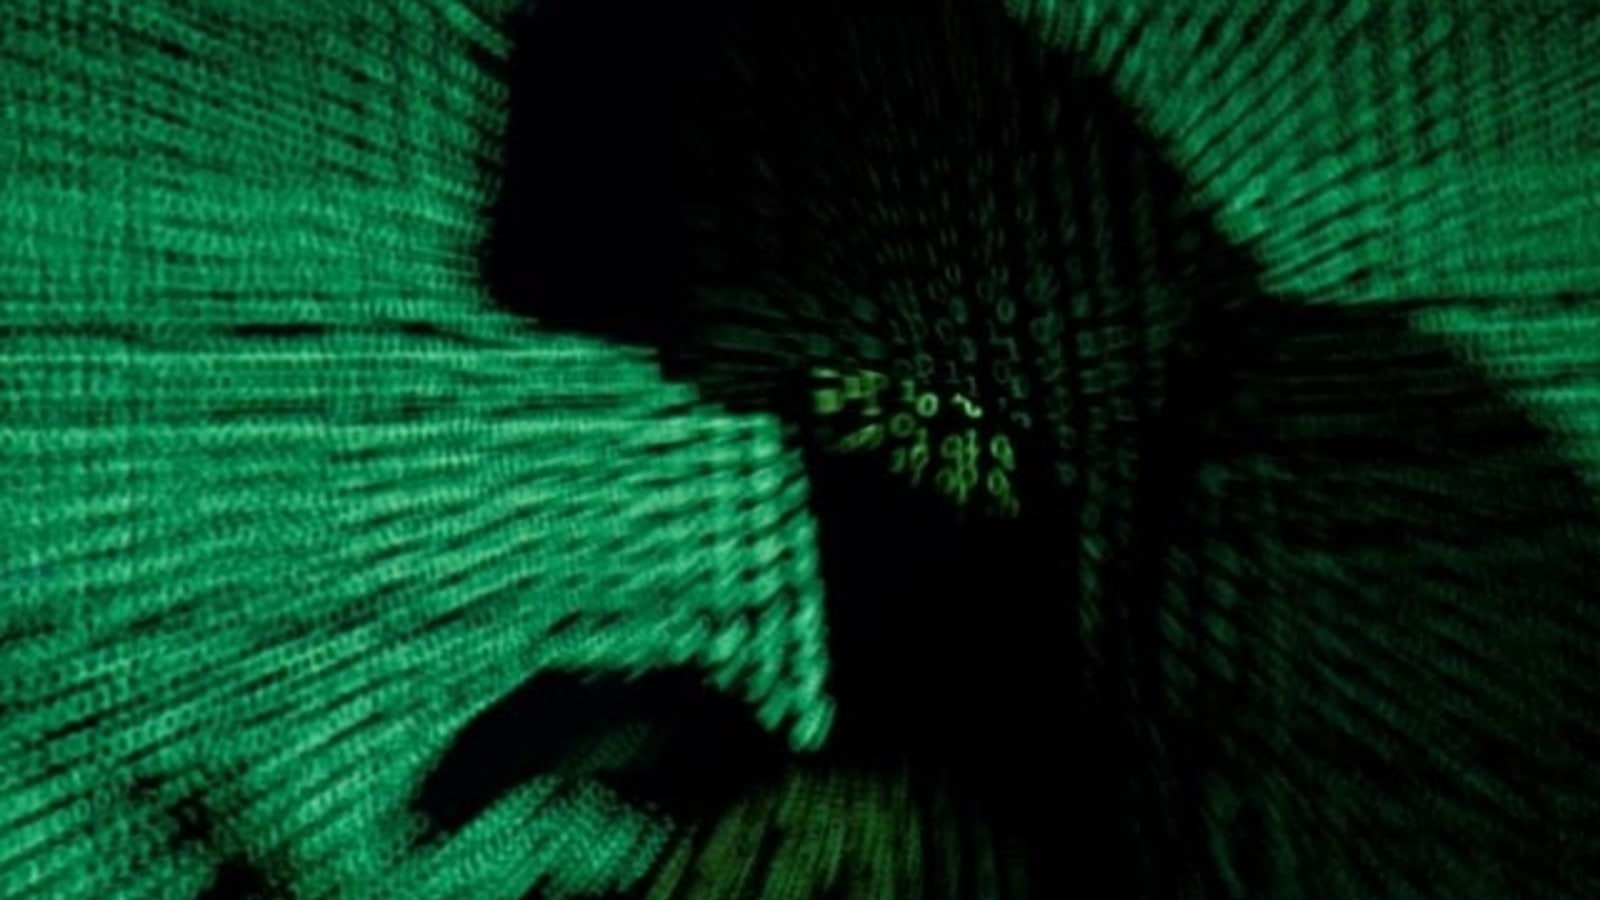 Sophisticated attacks from cybercriminals have risen in the last one and half years: Check Point’s Prakash Bell - HT Tech